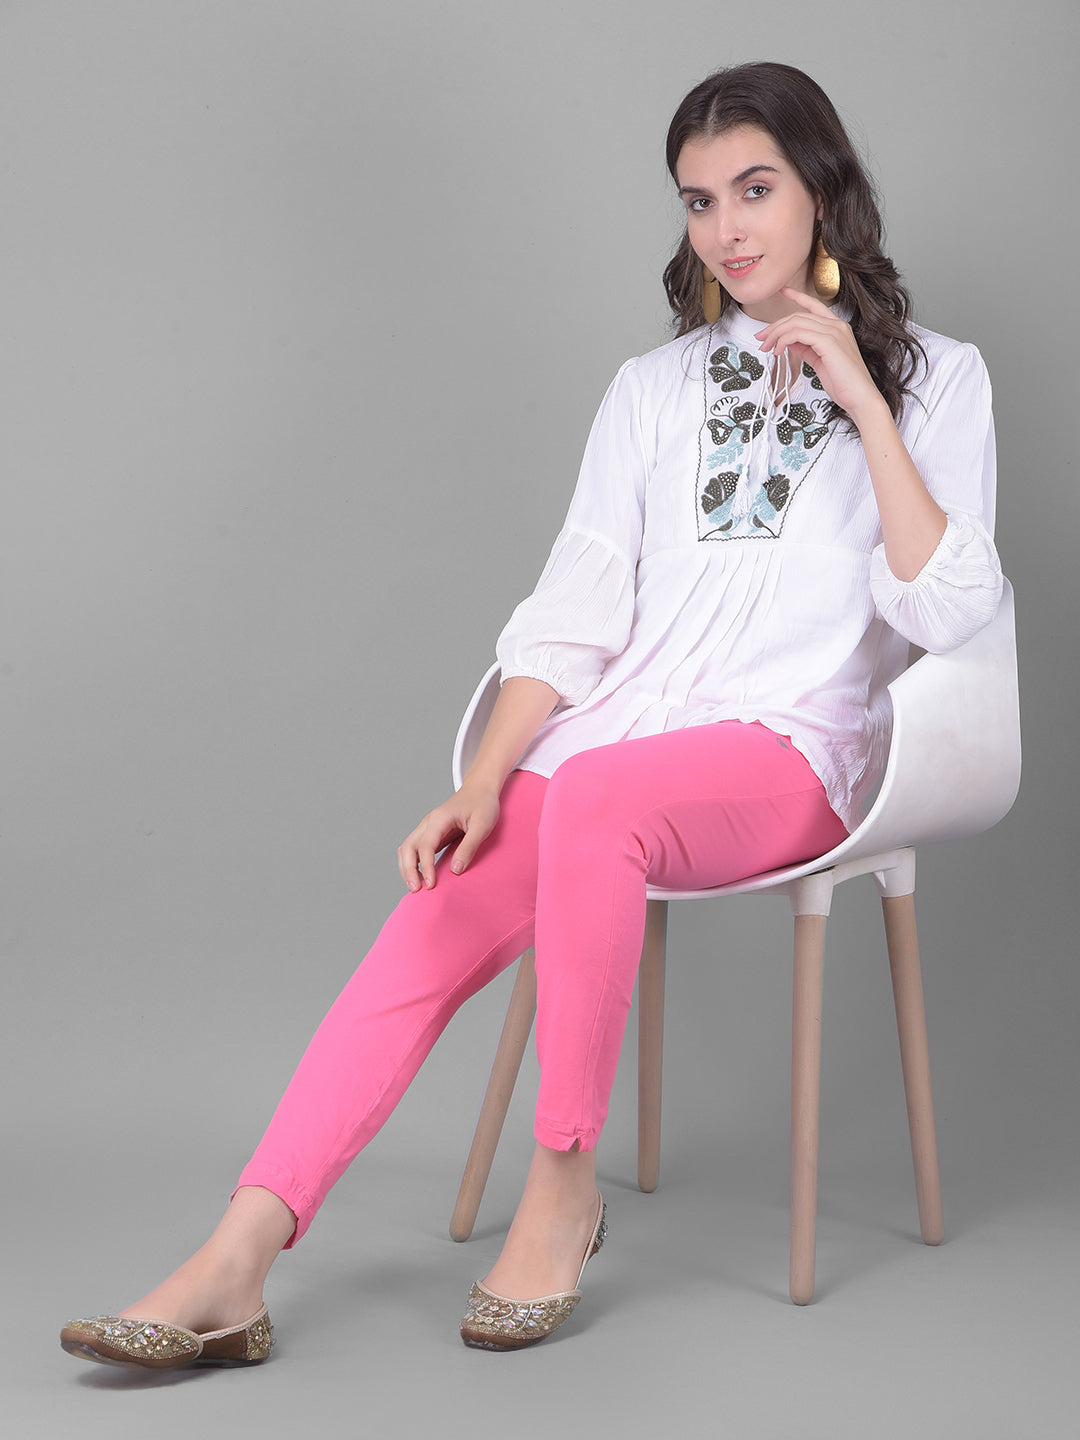 COMFORT LADY - Comfort Lady Indocut Leggings Wholesale Trader from Hyderabad